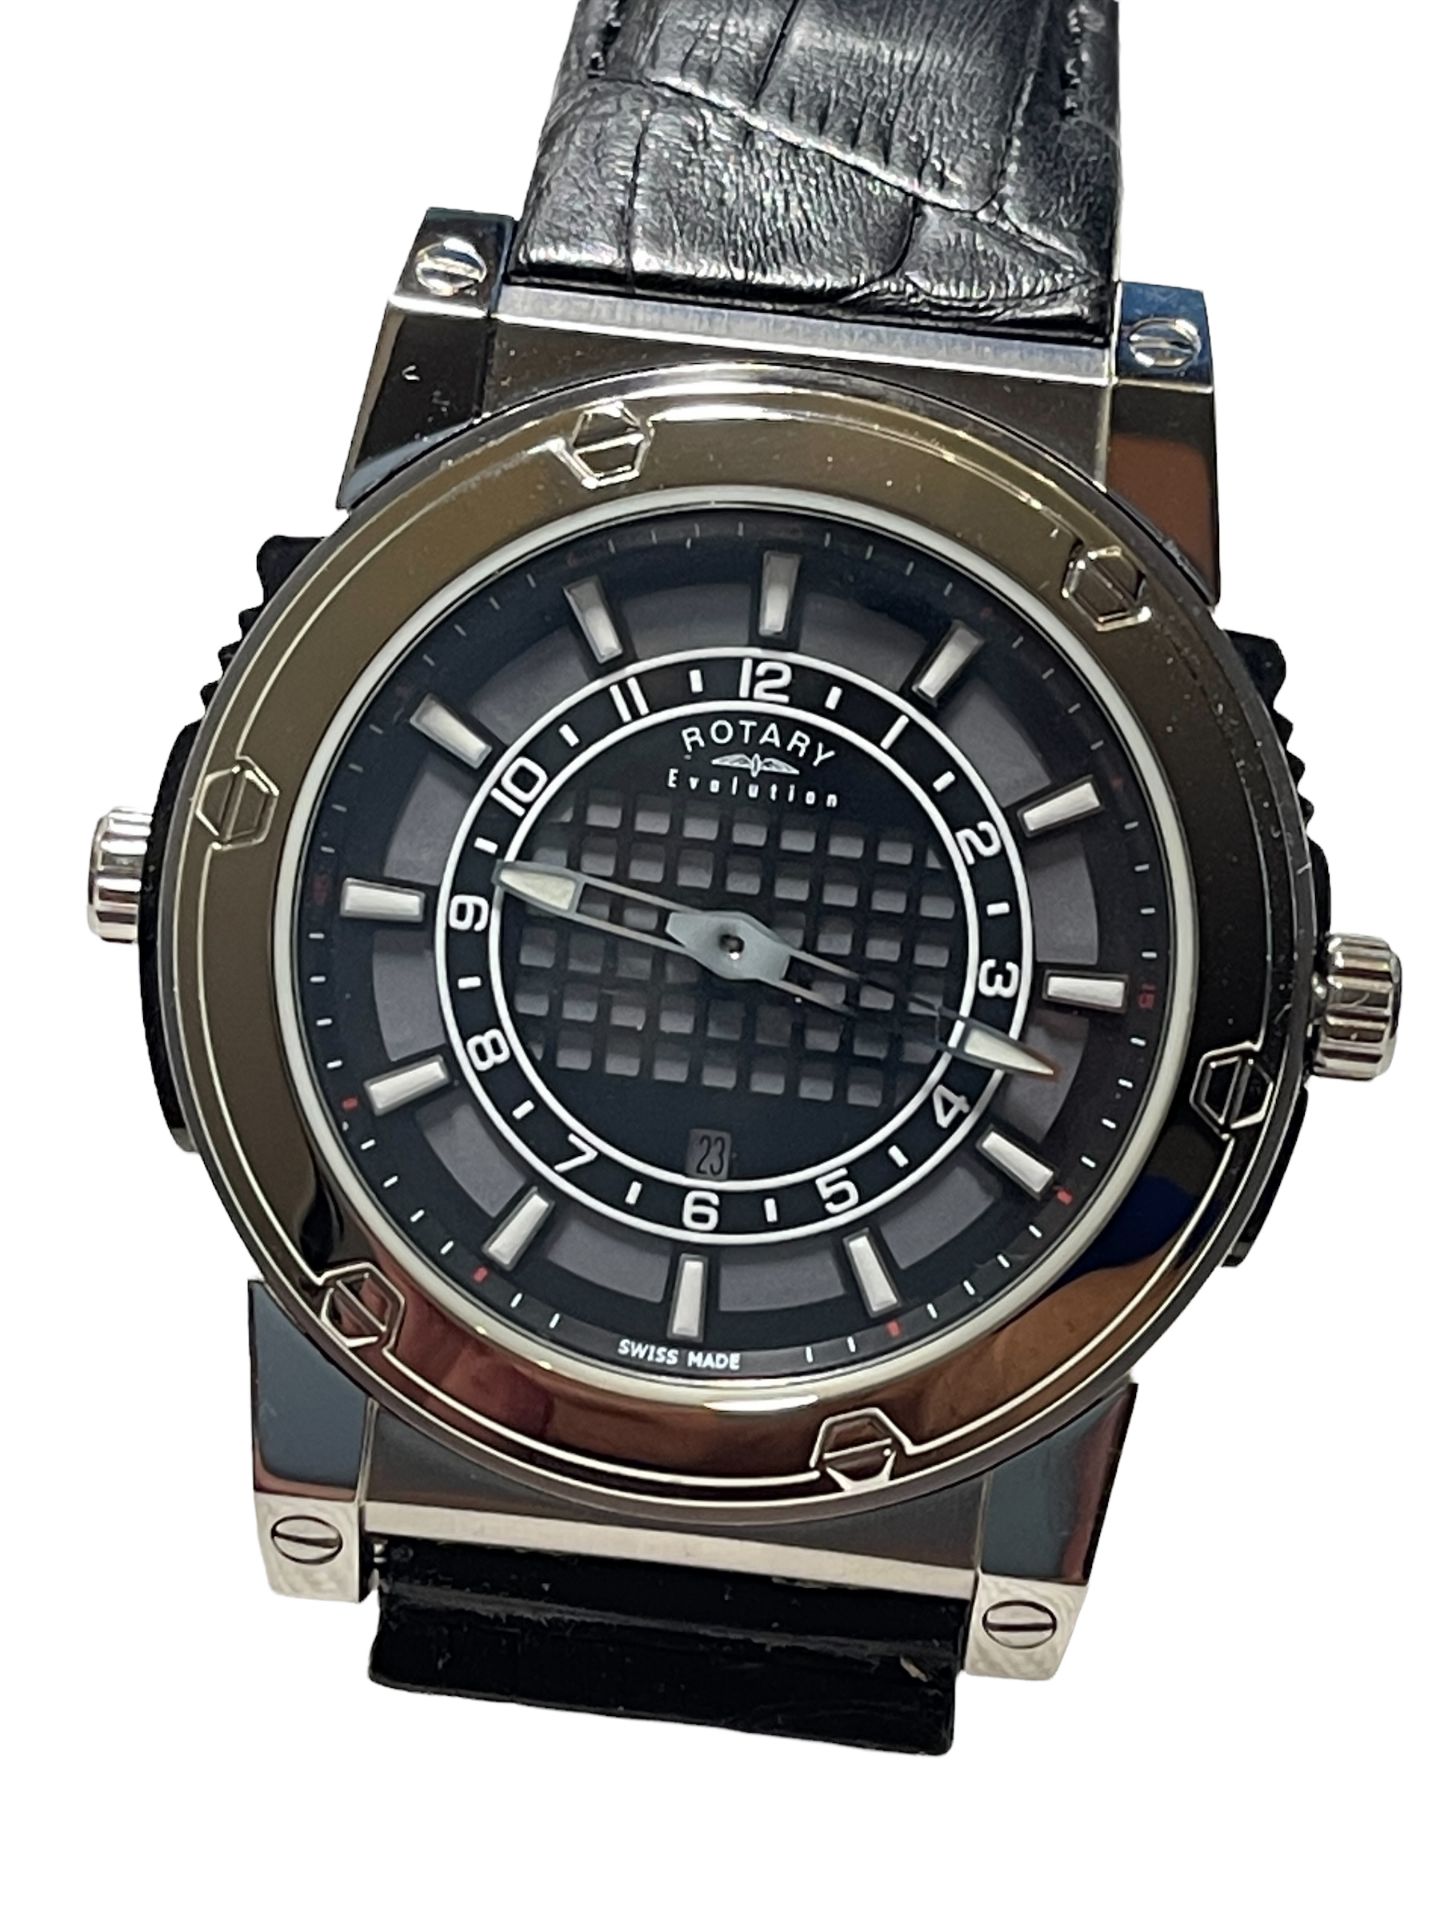 Swiss Made Rotary Evolution Dual Face Unisex Watch - Surplus Stock from Private Jet Charter RRP £750 - Image 5 of 14